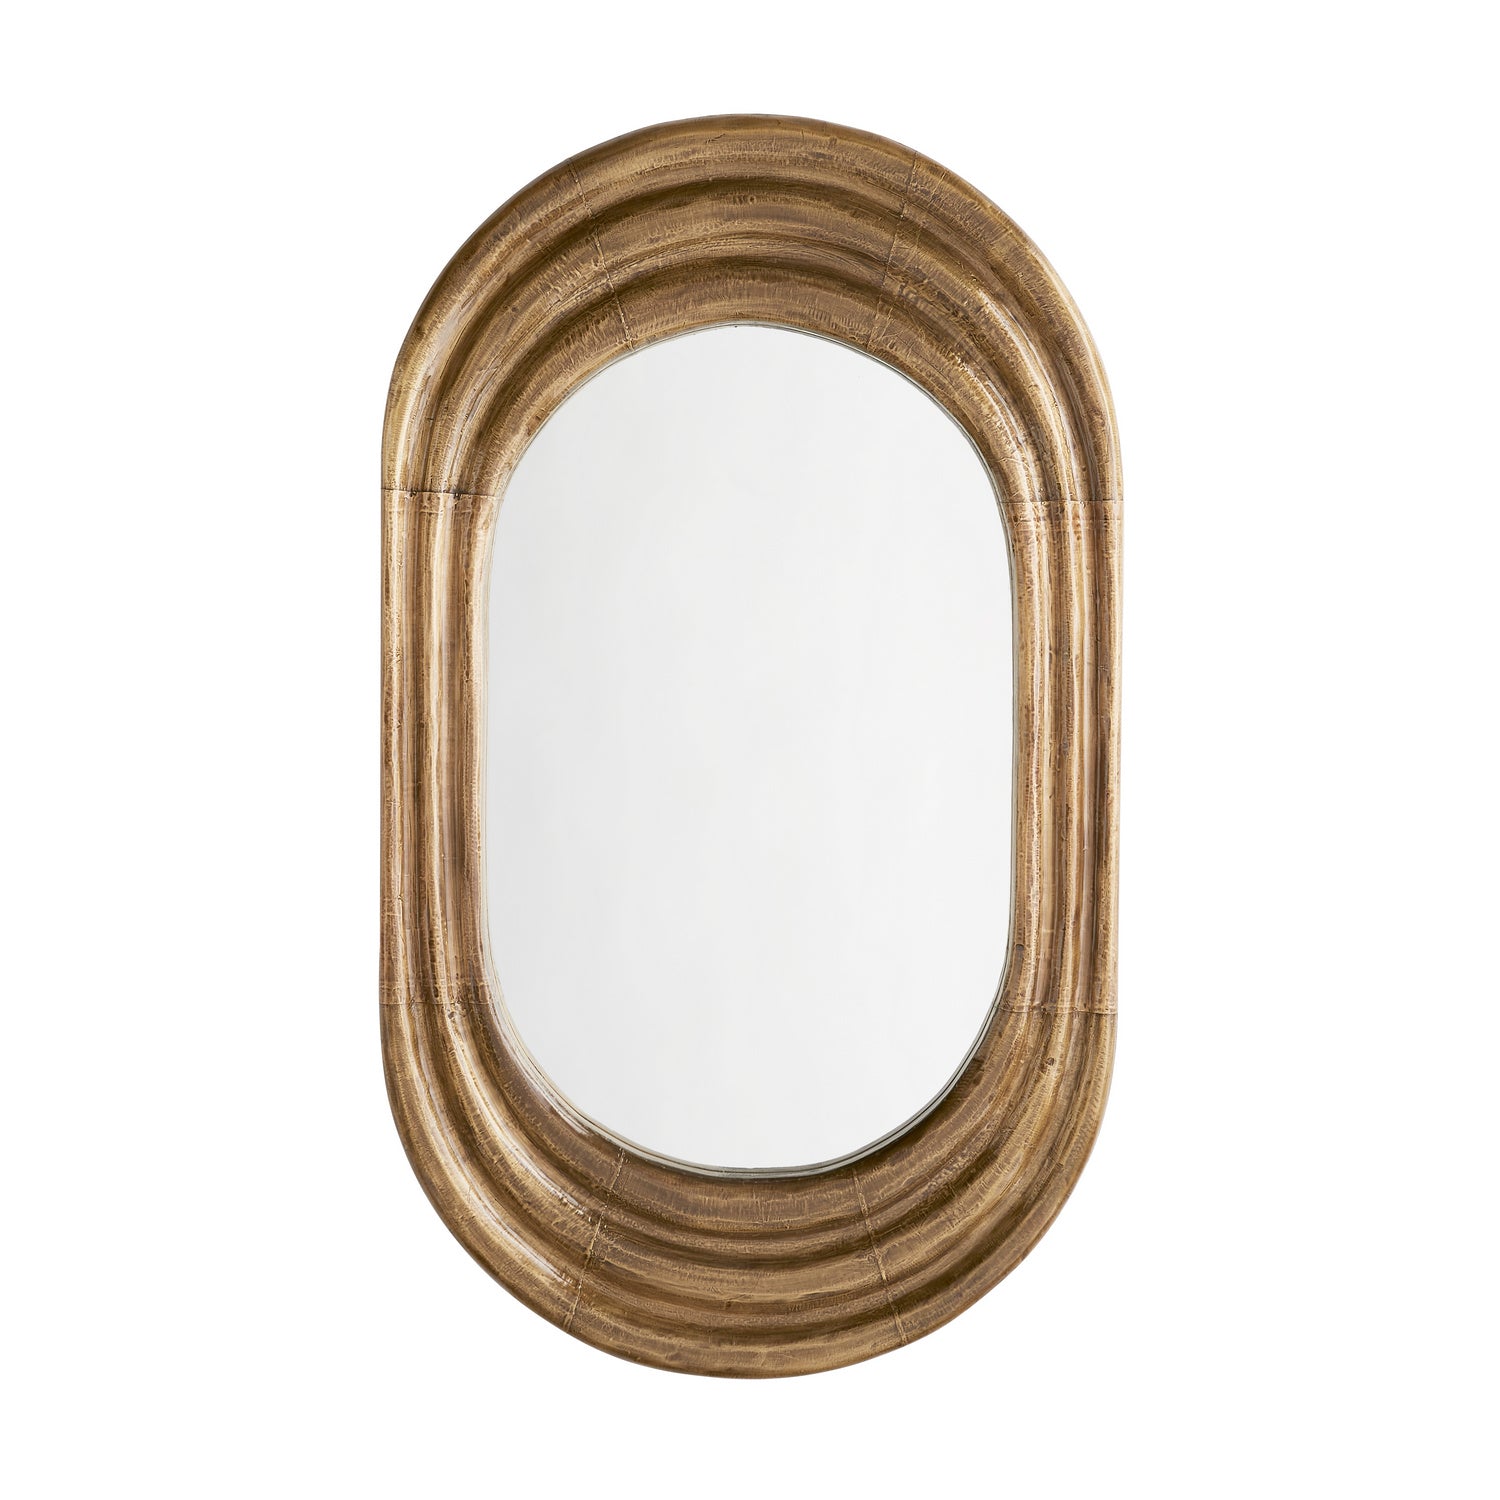 Mirror from the Georgina collection in Dark Antique finish